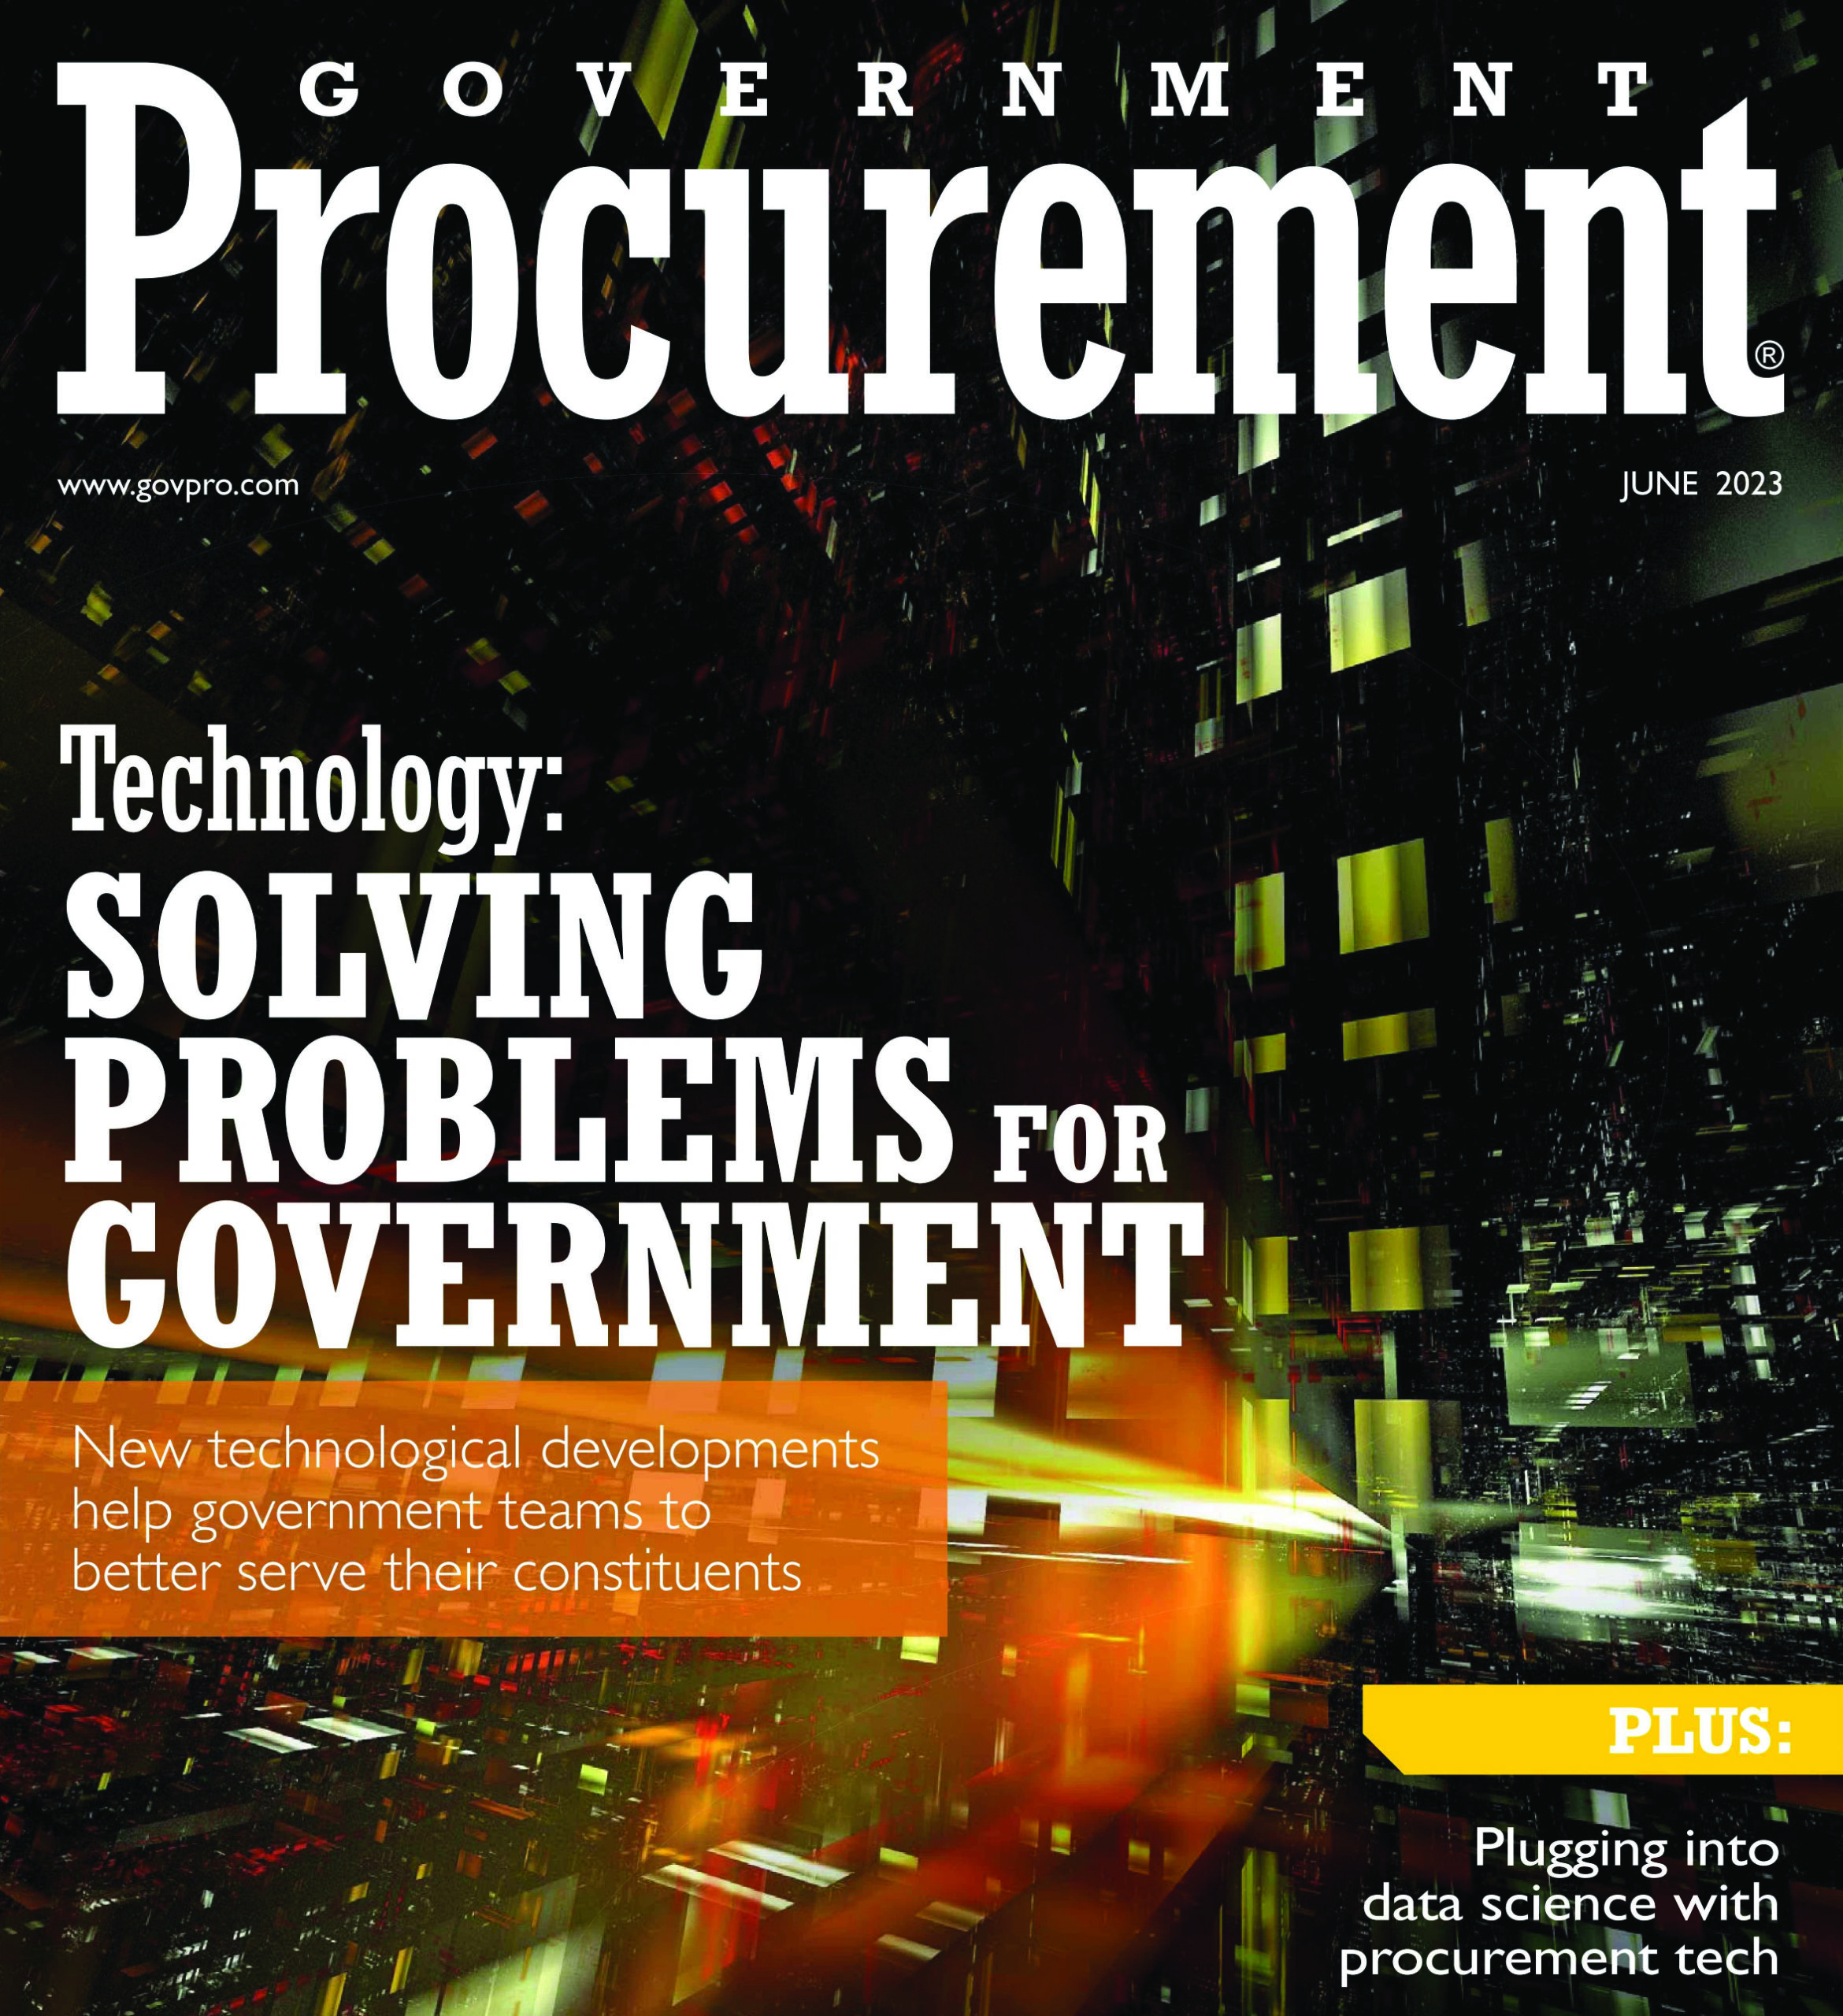 EqualLevel Is Featured in Government Procurement Magazine